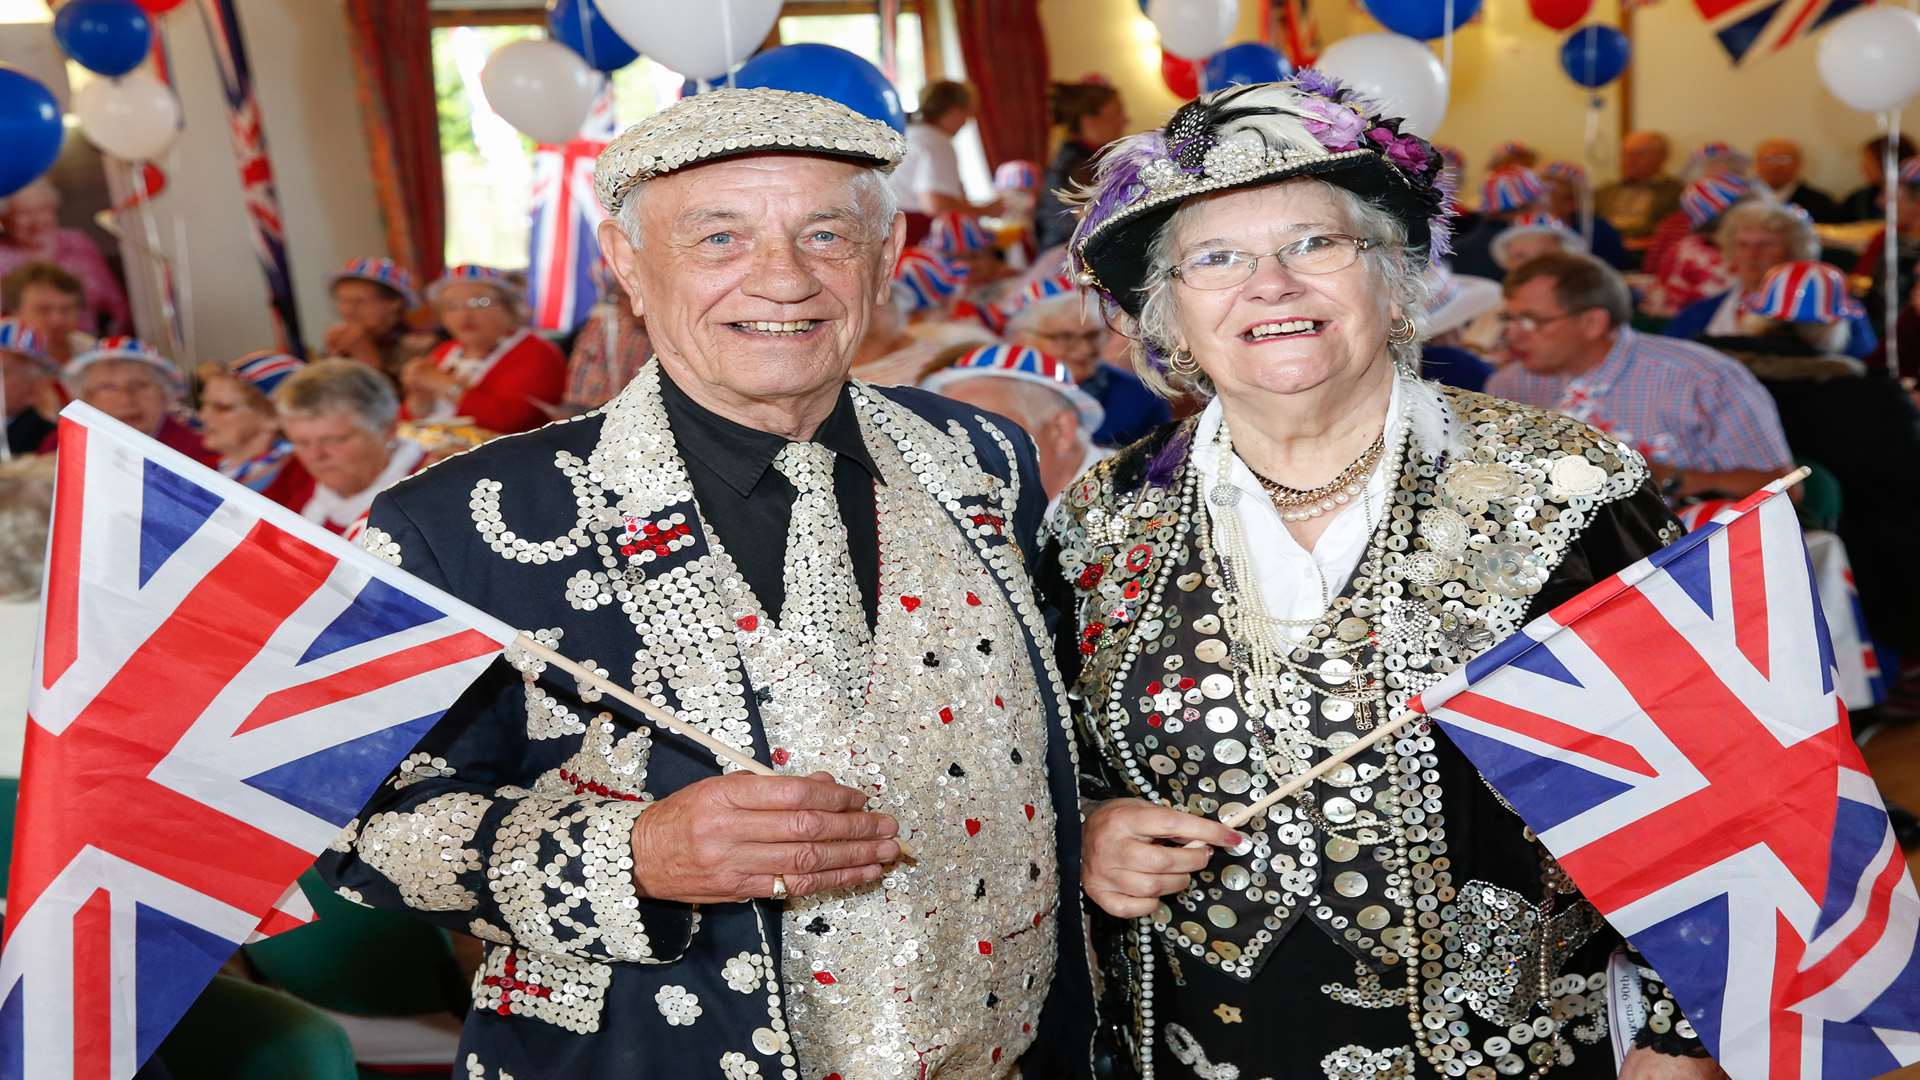 John Scott, Pearly King of Mile End, and Peggy Scott, Pearly Queen of Highgate